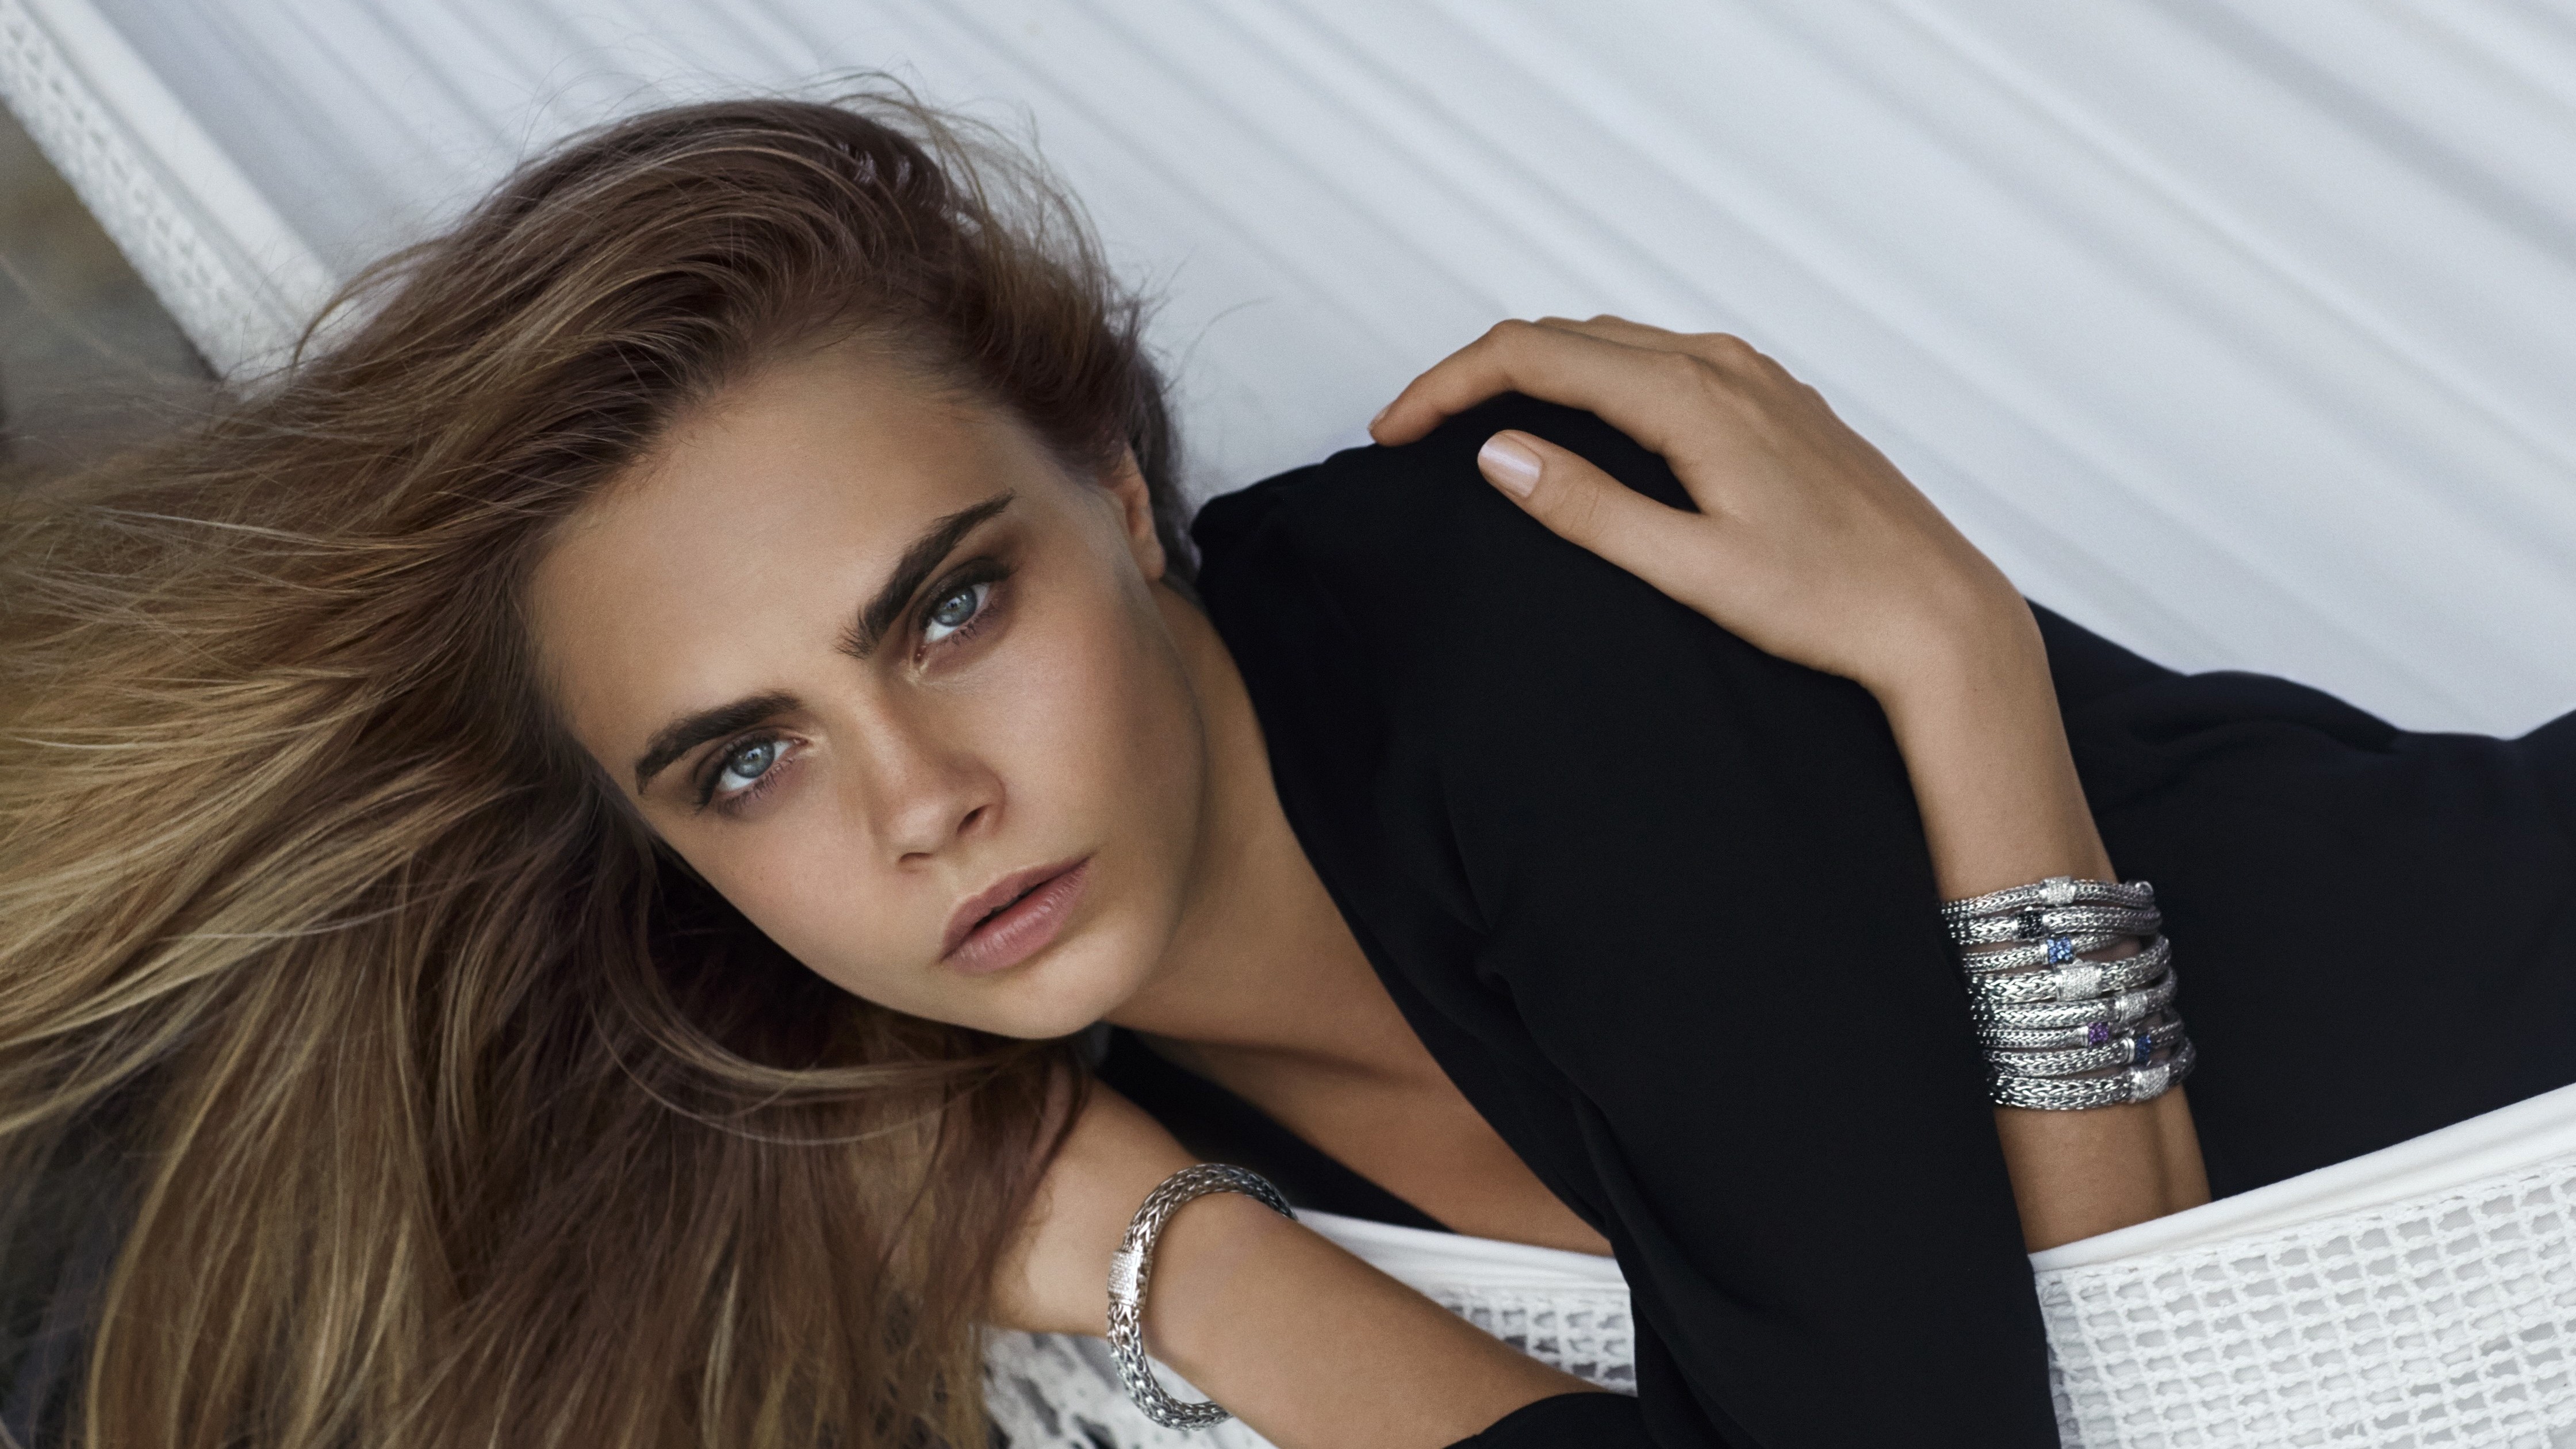 Cara Delevingne 2019 4k 4480x2520 Hot Desktop and background for your PC and mobile